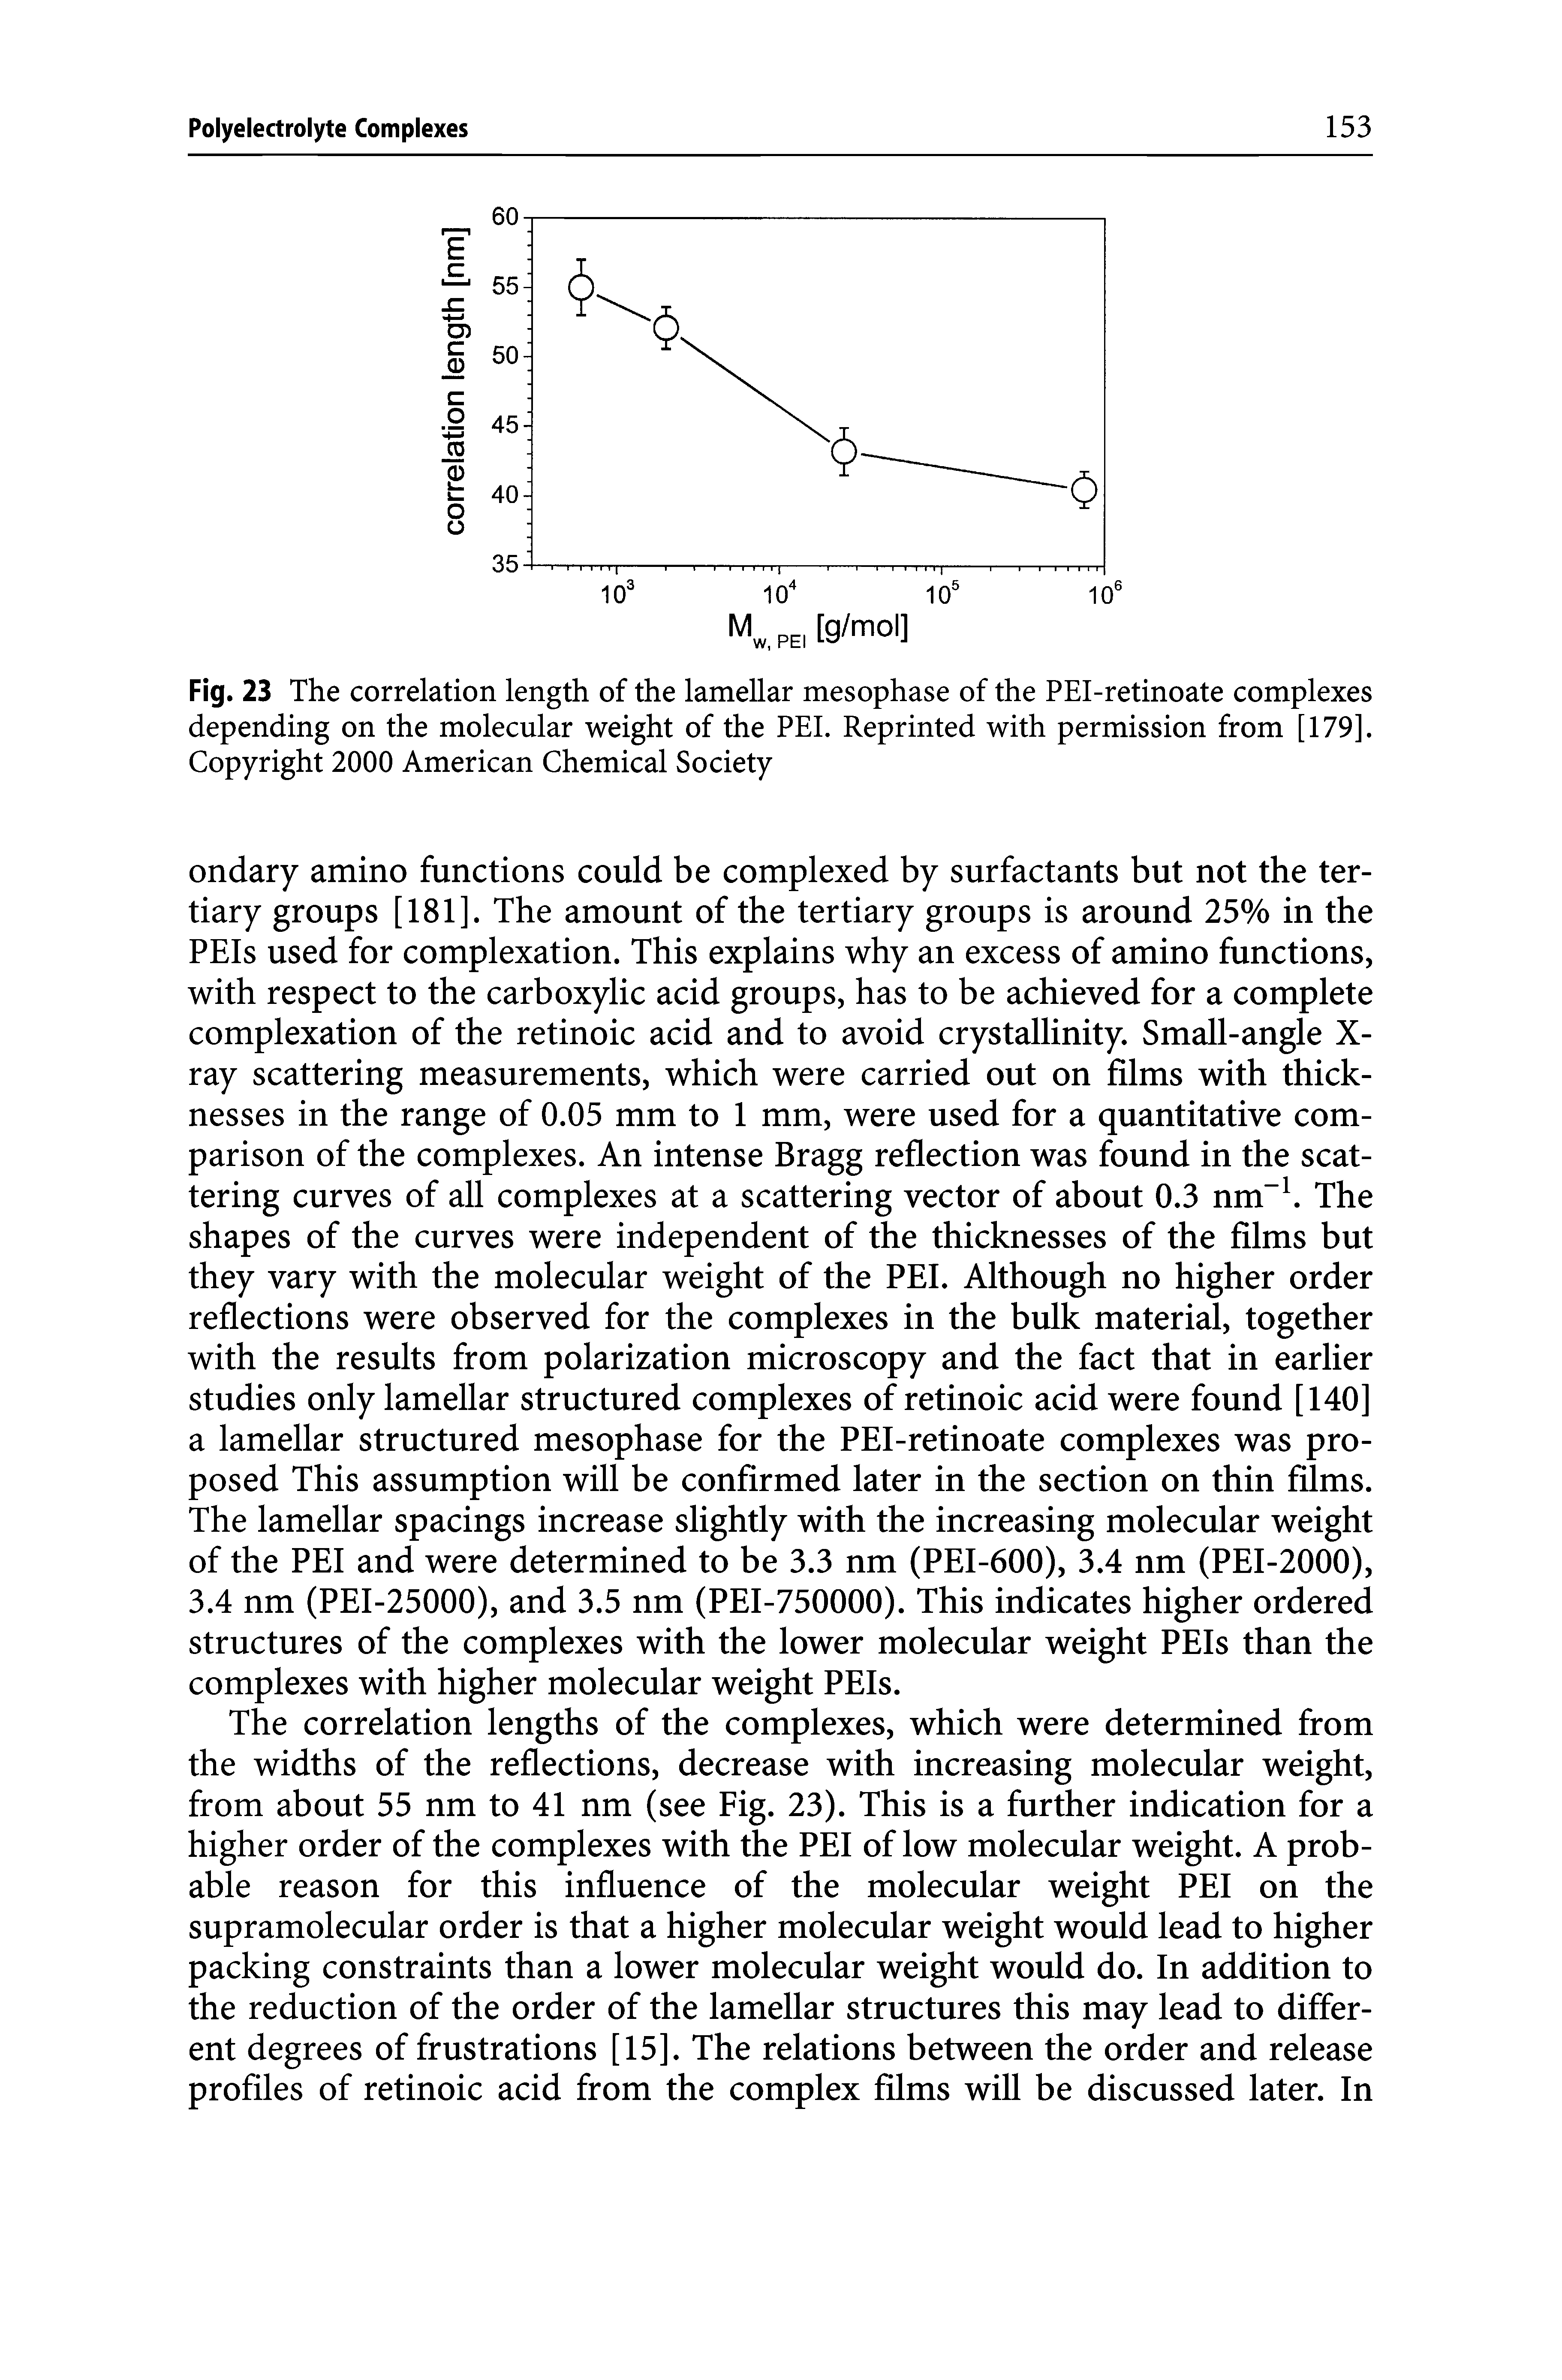 Fig. 23 The correlation length of the lamellar mesophase of the PEI-retinoate complexes depending on the molecular weight of the PEI. Reprinted with permission from [179]. Copyright 2000 American Chemical Society...